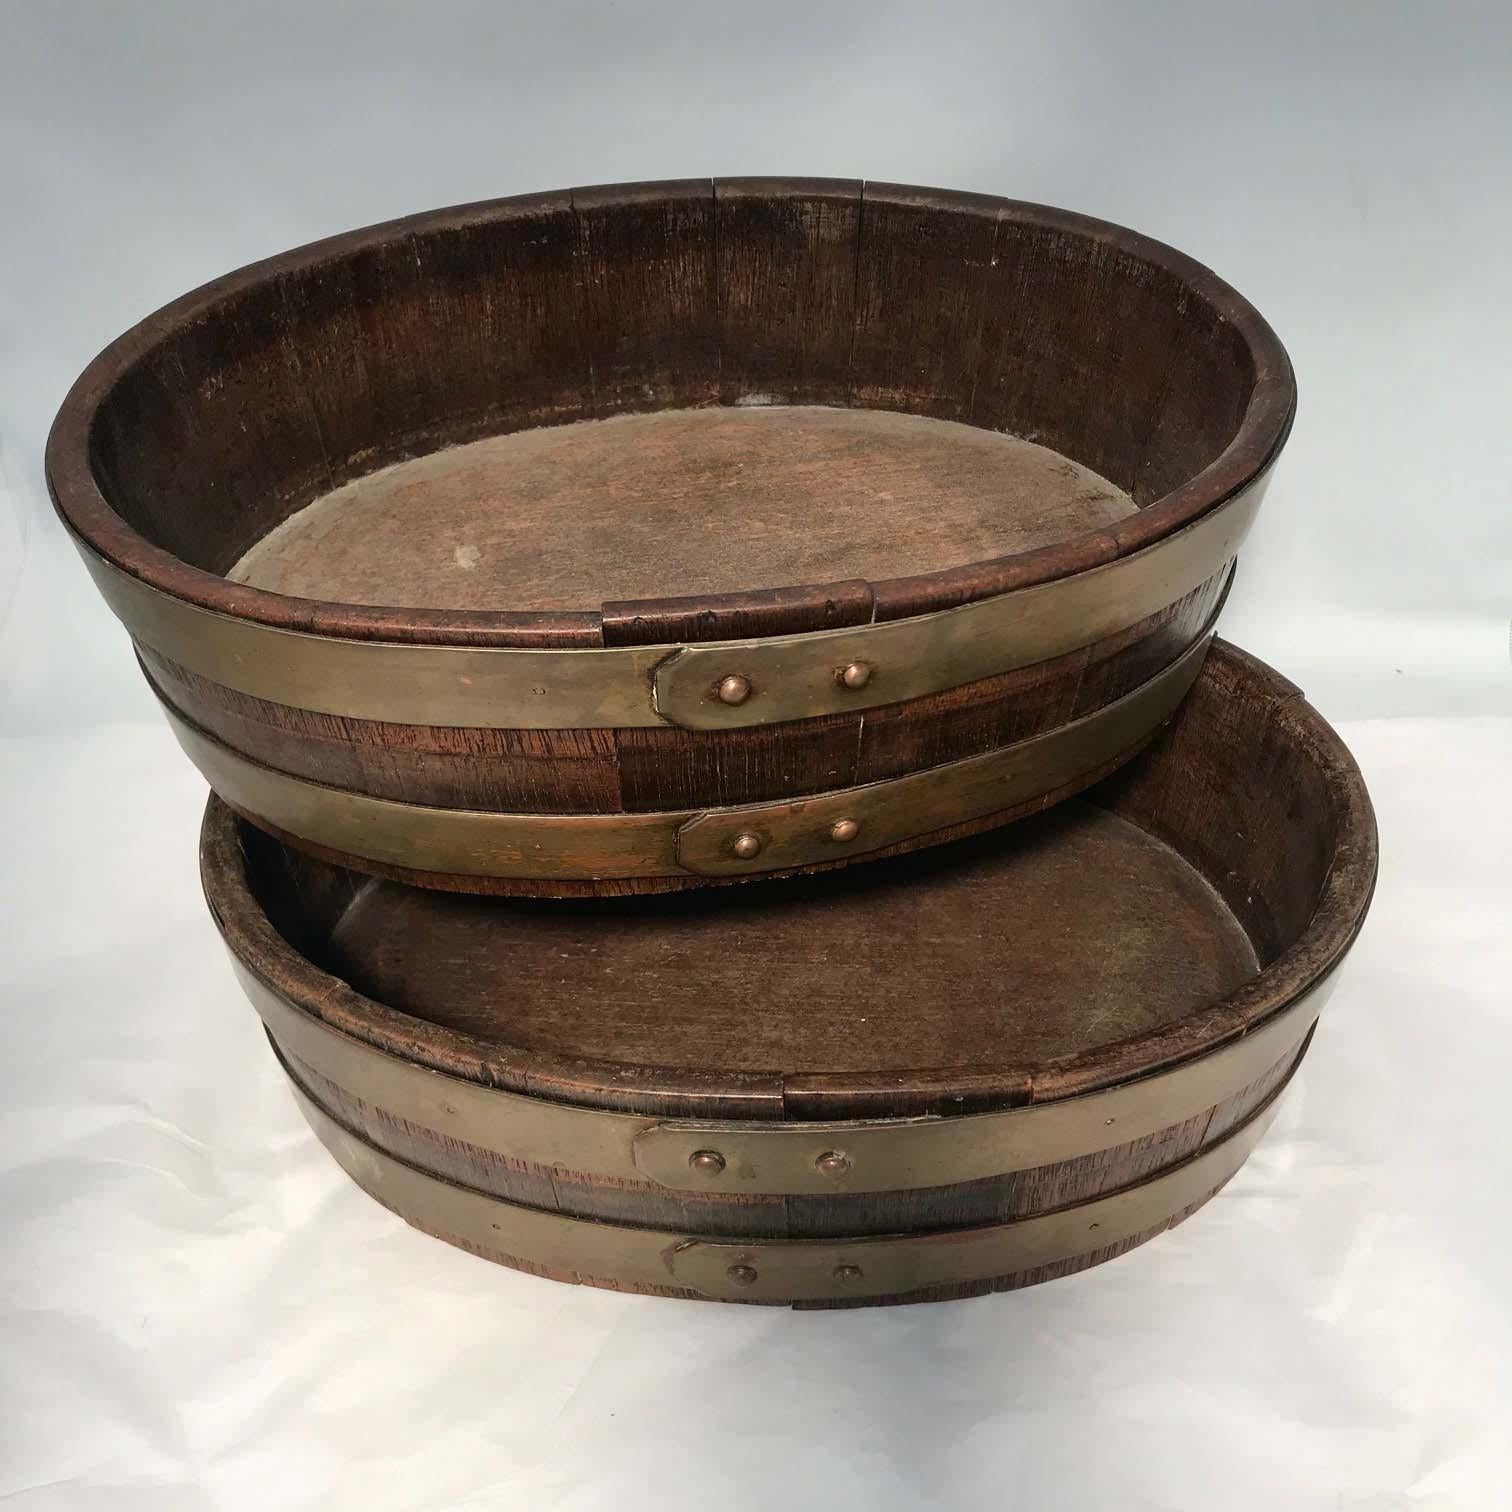 These are rarely found as a pair and are typically more bucket-shaped. This pair are shallow, oval, staved and brass-banded, they are ideal for anything served on ice since they are complete with galvanized liners. They could also be used for